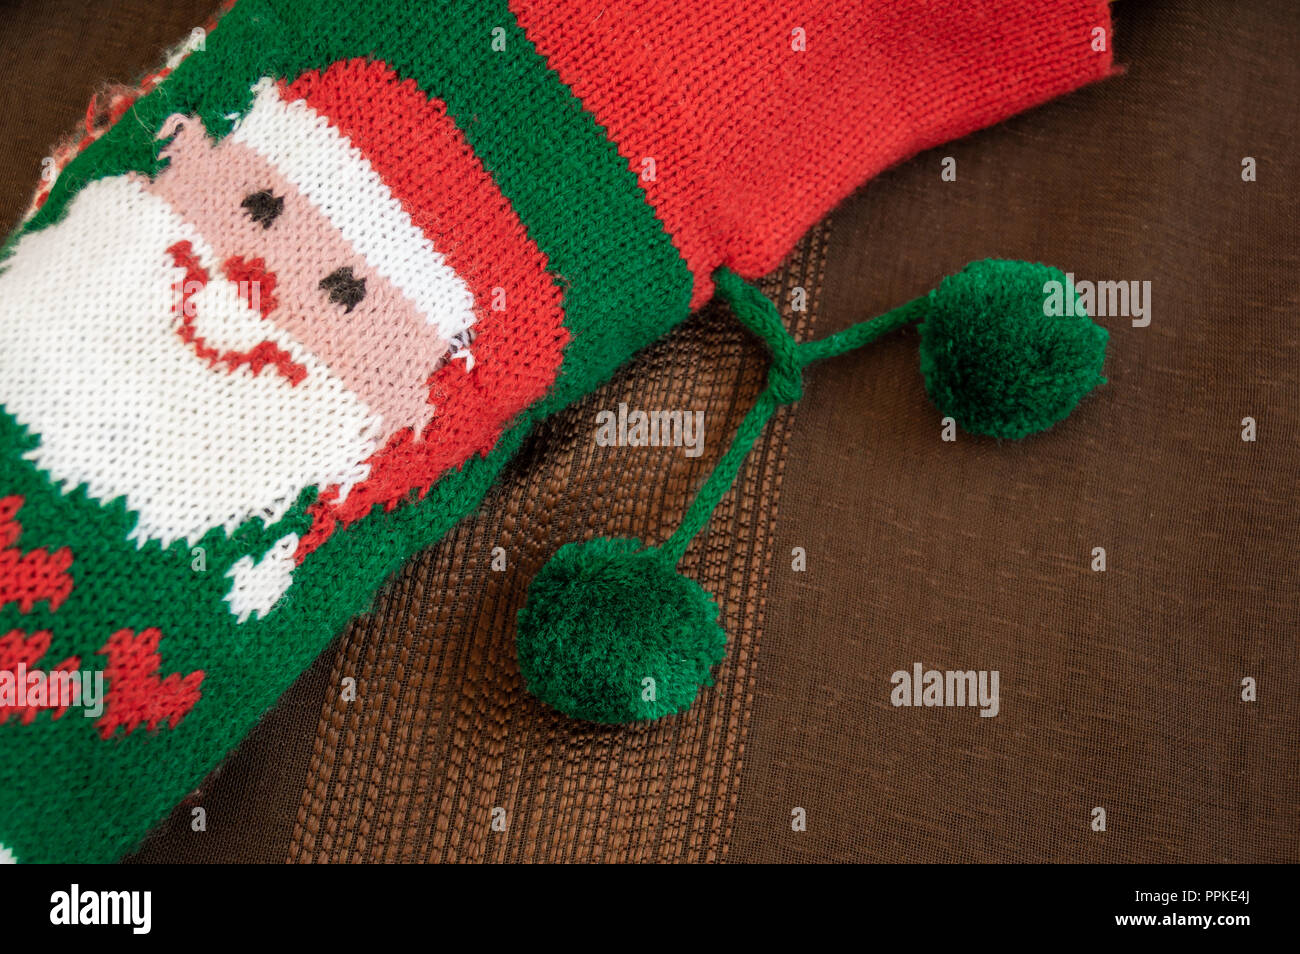 Colorful christmas sock with drawing of Santa Claus to fill with gifts. Sock with decoration and christmas motifs, traditional in these holidays. Stock Photo